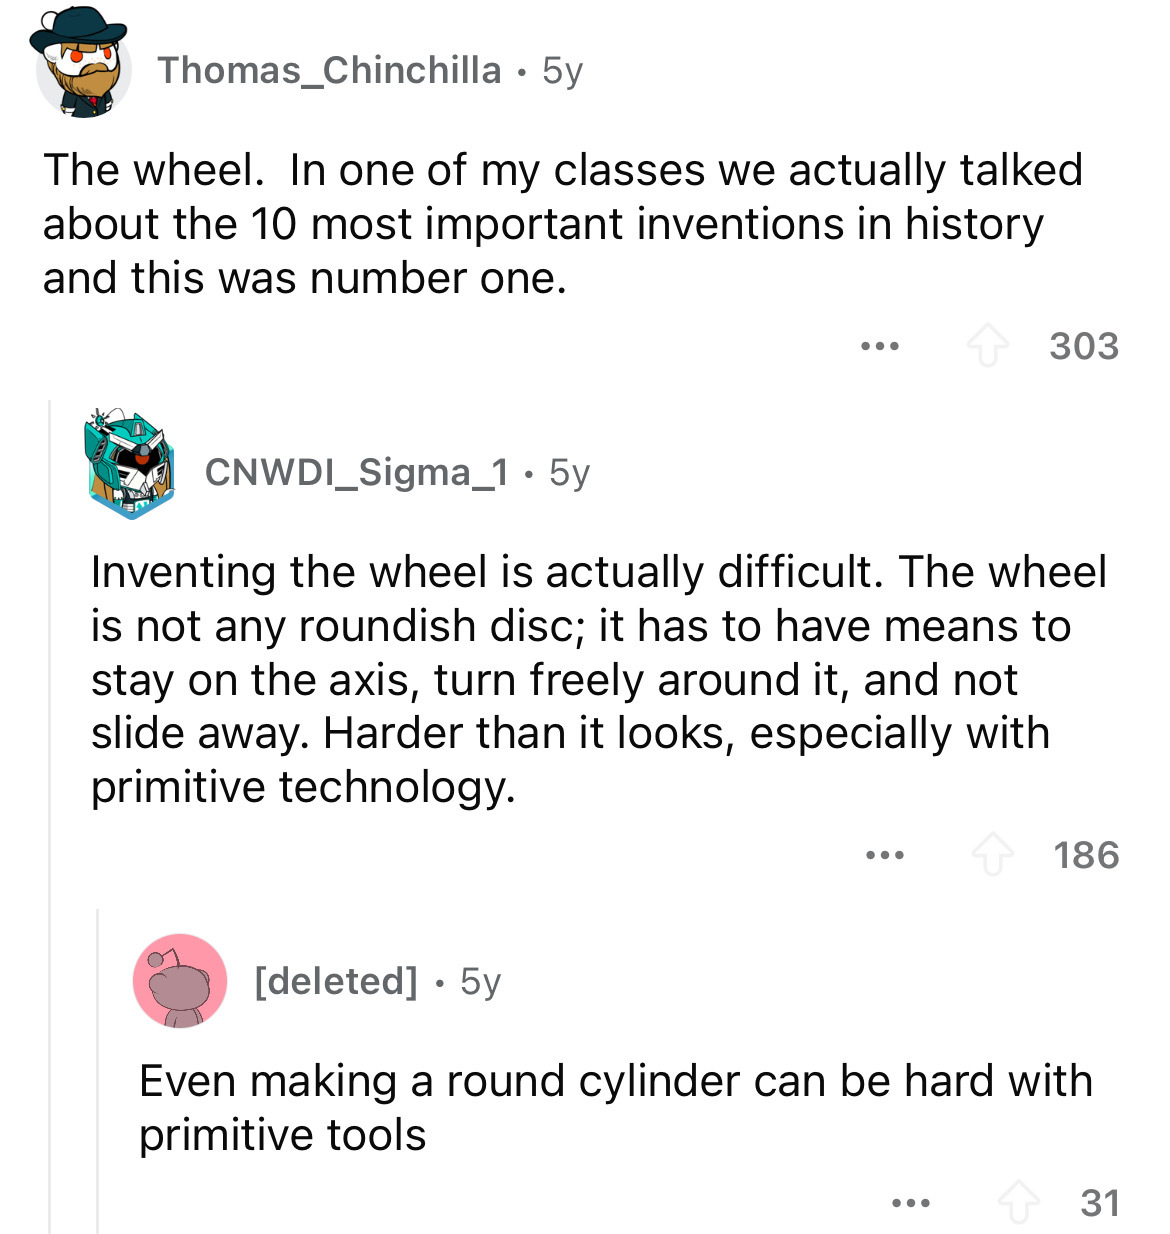 screenshot - Thomas_Chinchilla 5y The wheel. In one of my classes we actually talked about the 10 most important inventions in history and this was number one. ... 303 CNWDI_Sigma_1.5y Inventing the wheel is actually difficult. The wheel is not any roundi